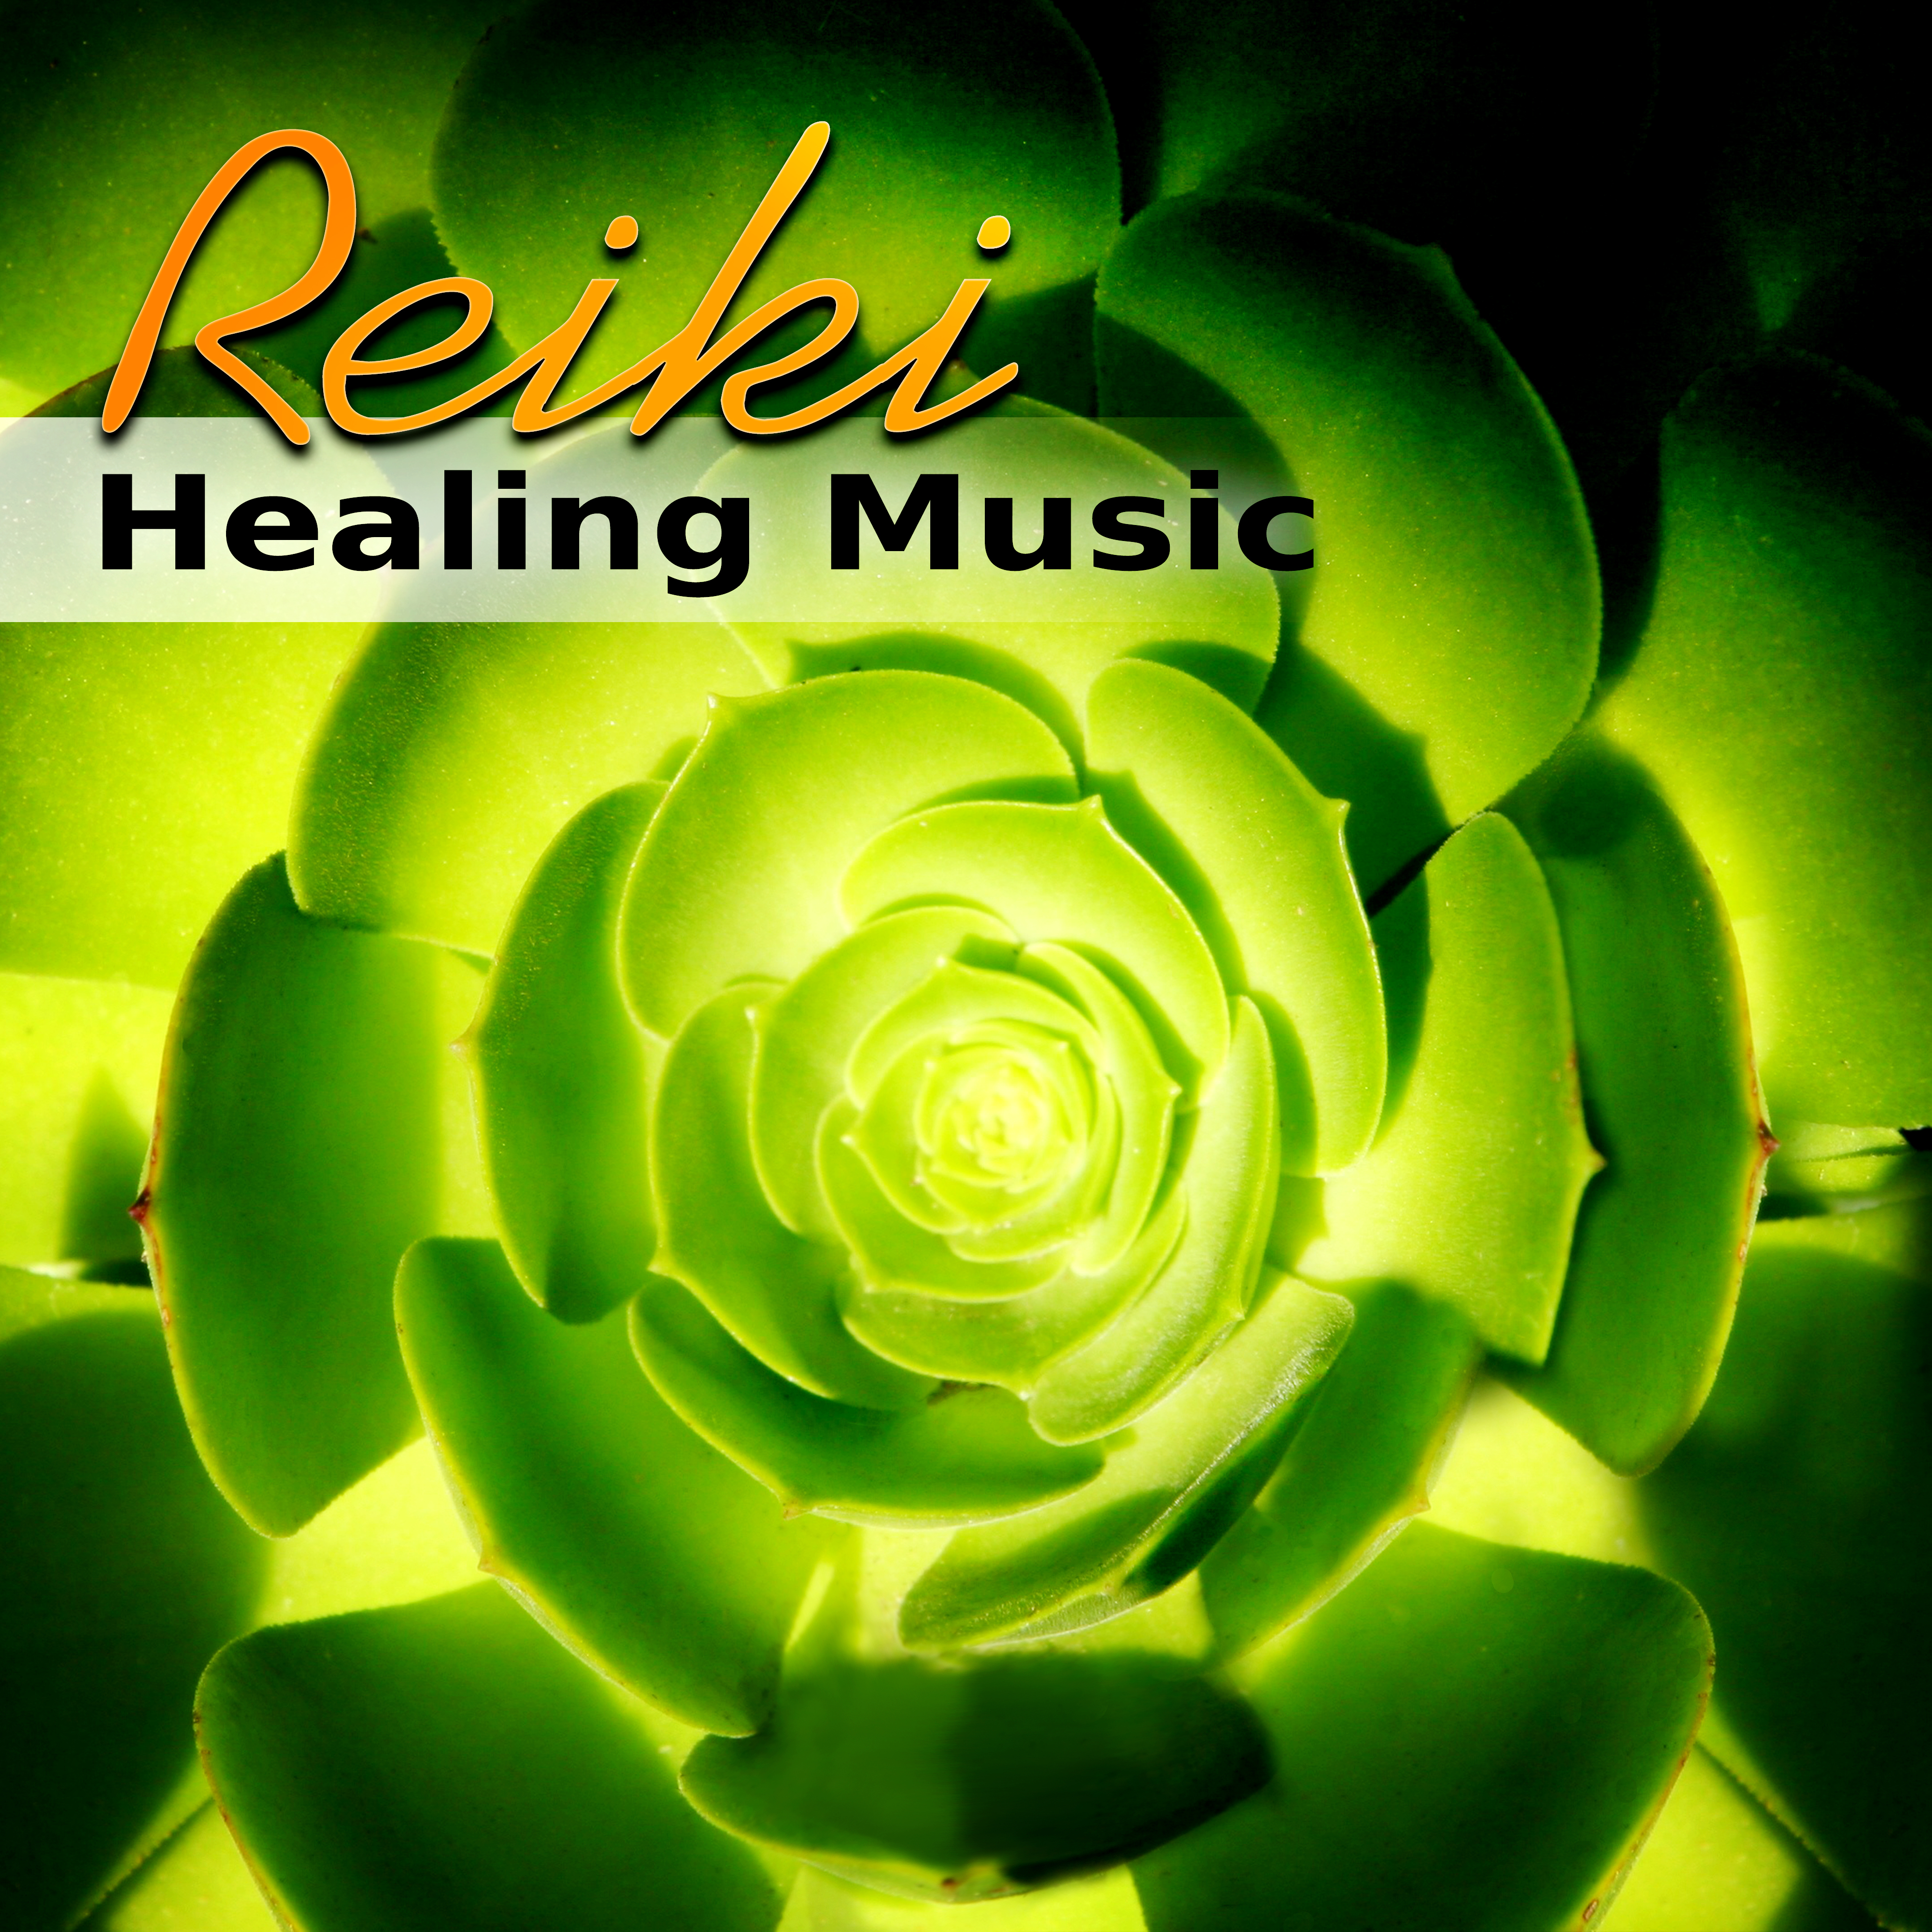 Reiki Healing Music - Relaxation Music Best of Spa Background Songs Relaxation Meditation, Peace of Mind, Touch Therapy, Soothing Sounds for Massage